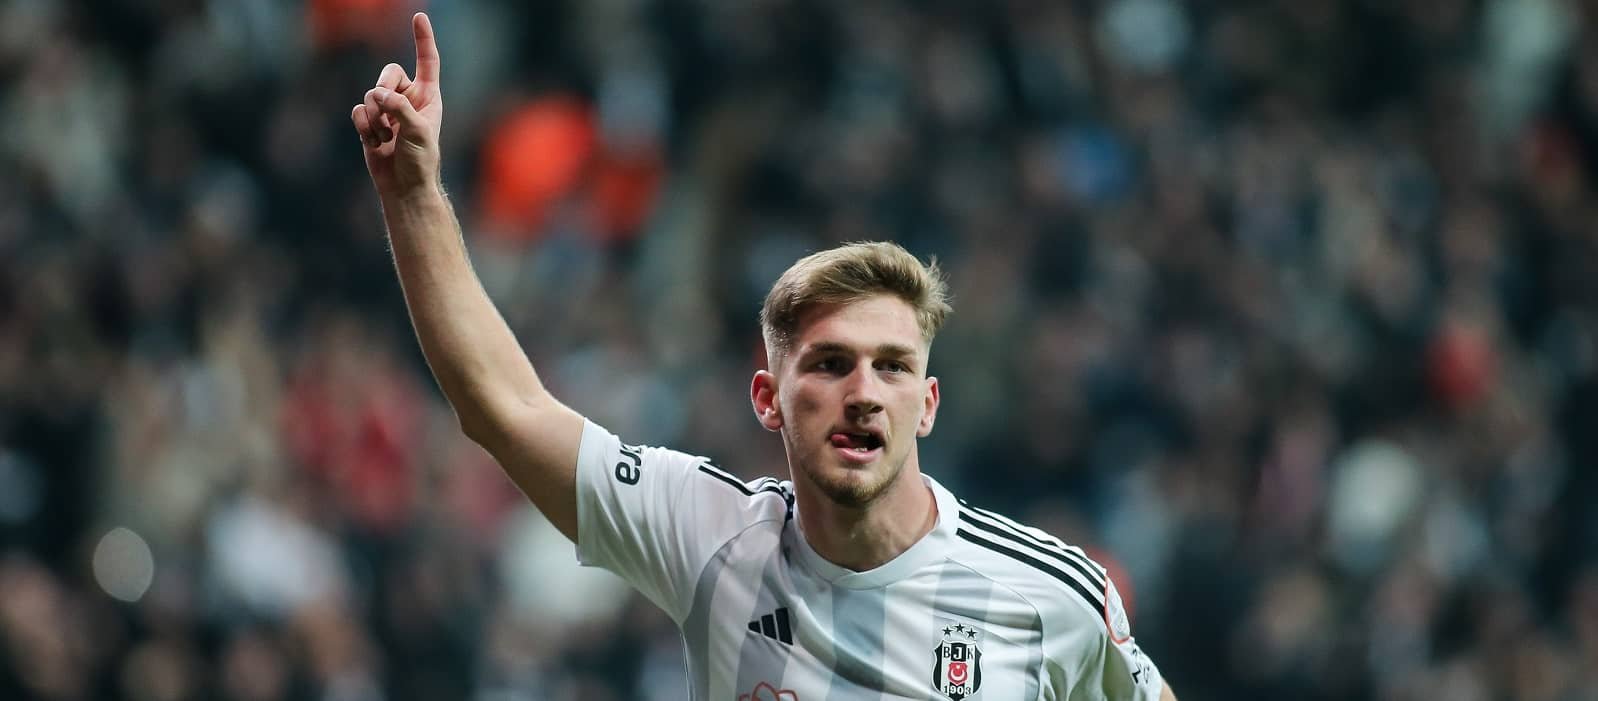 Manchester United scouting Turkish wonderkid Semih Kilicsoy who has nine goals in last 10 games – Man United News And Transfer News